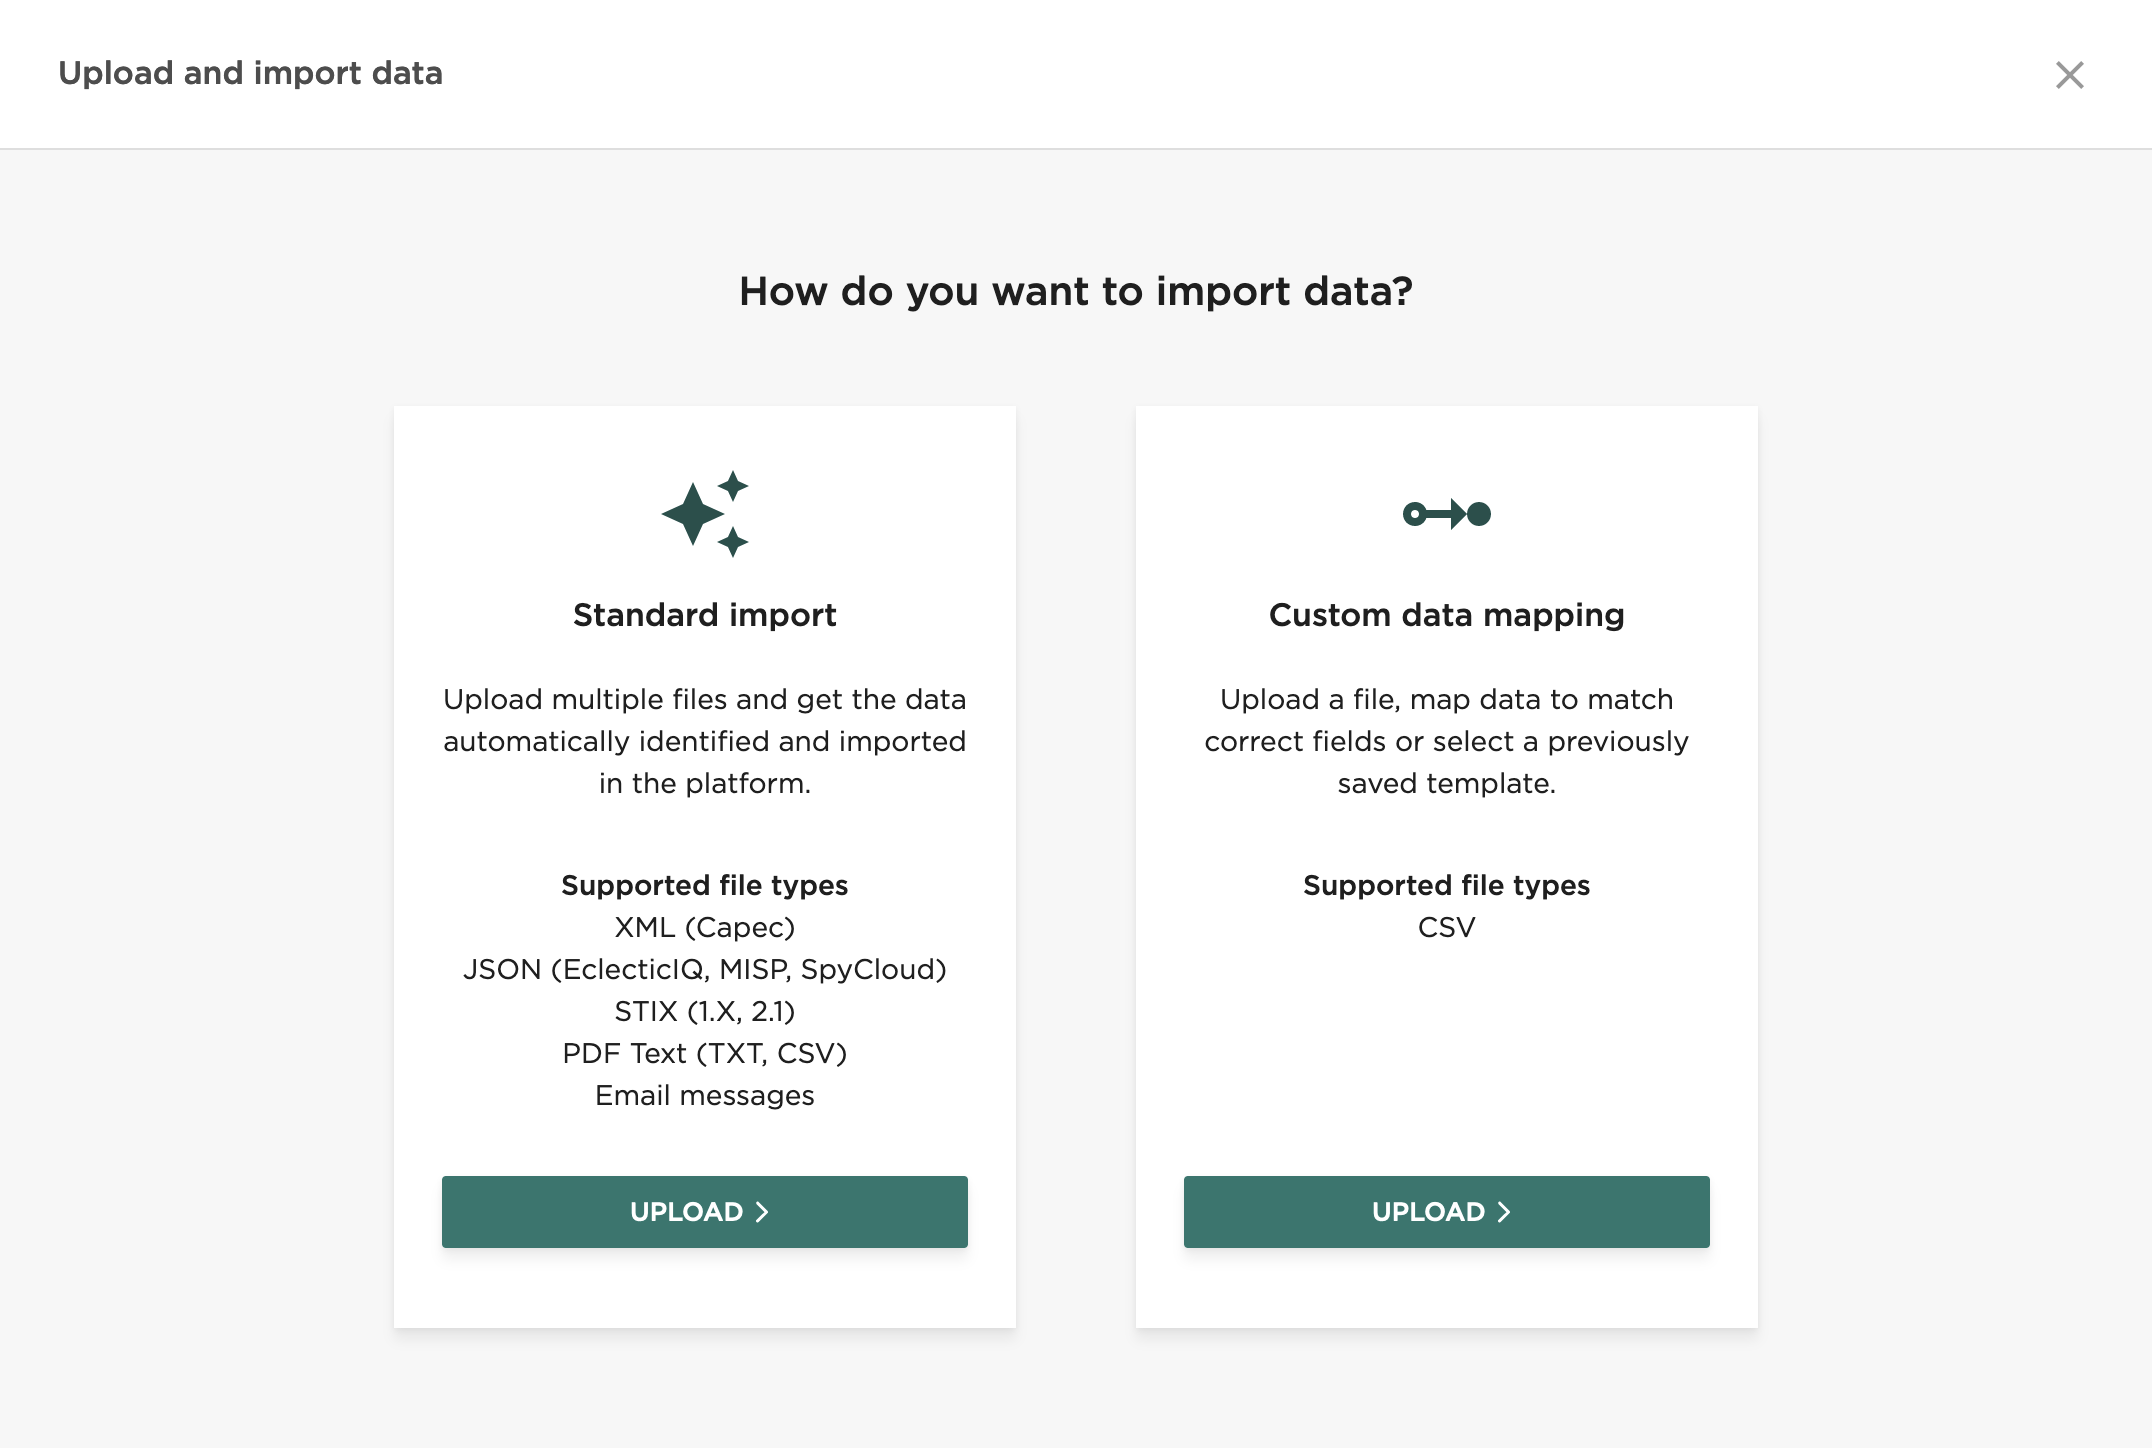 Upload and import data modal allows you to select Standard import or Custom data mapping.